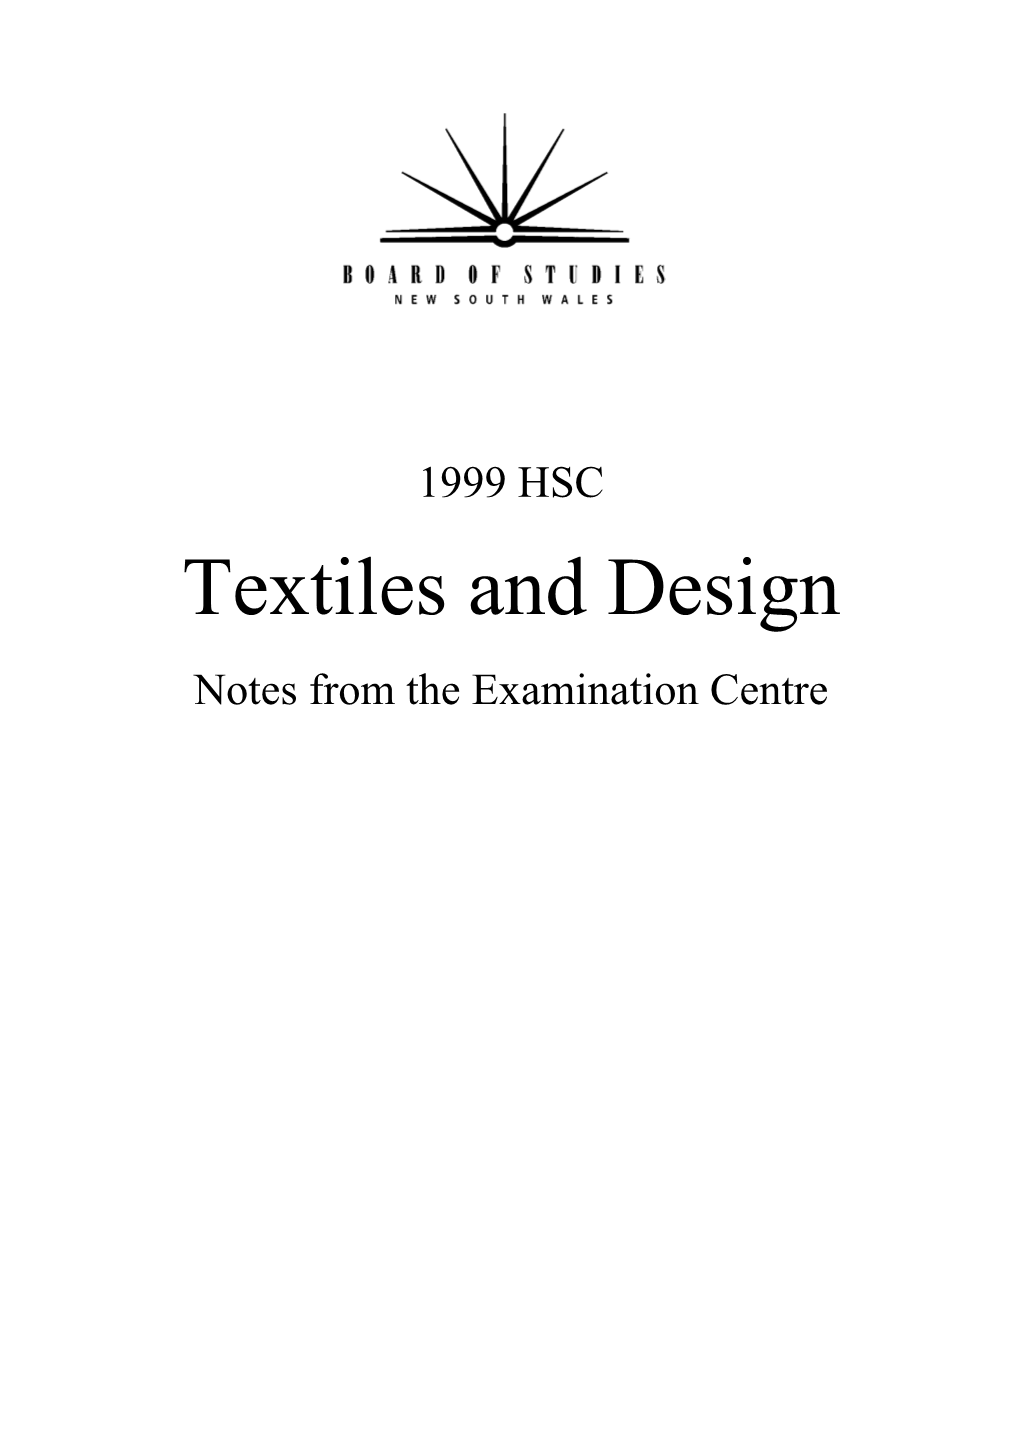 Textiles and Design Notes from the Examination Centre  Board of Studies 2000